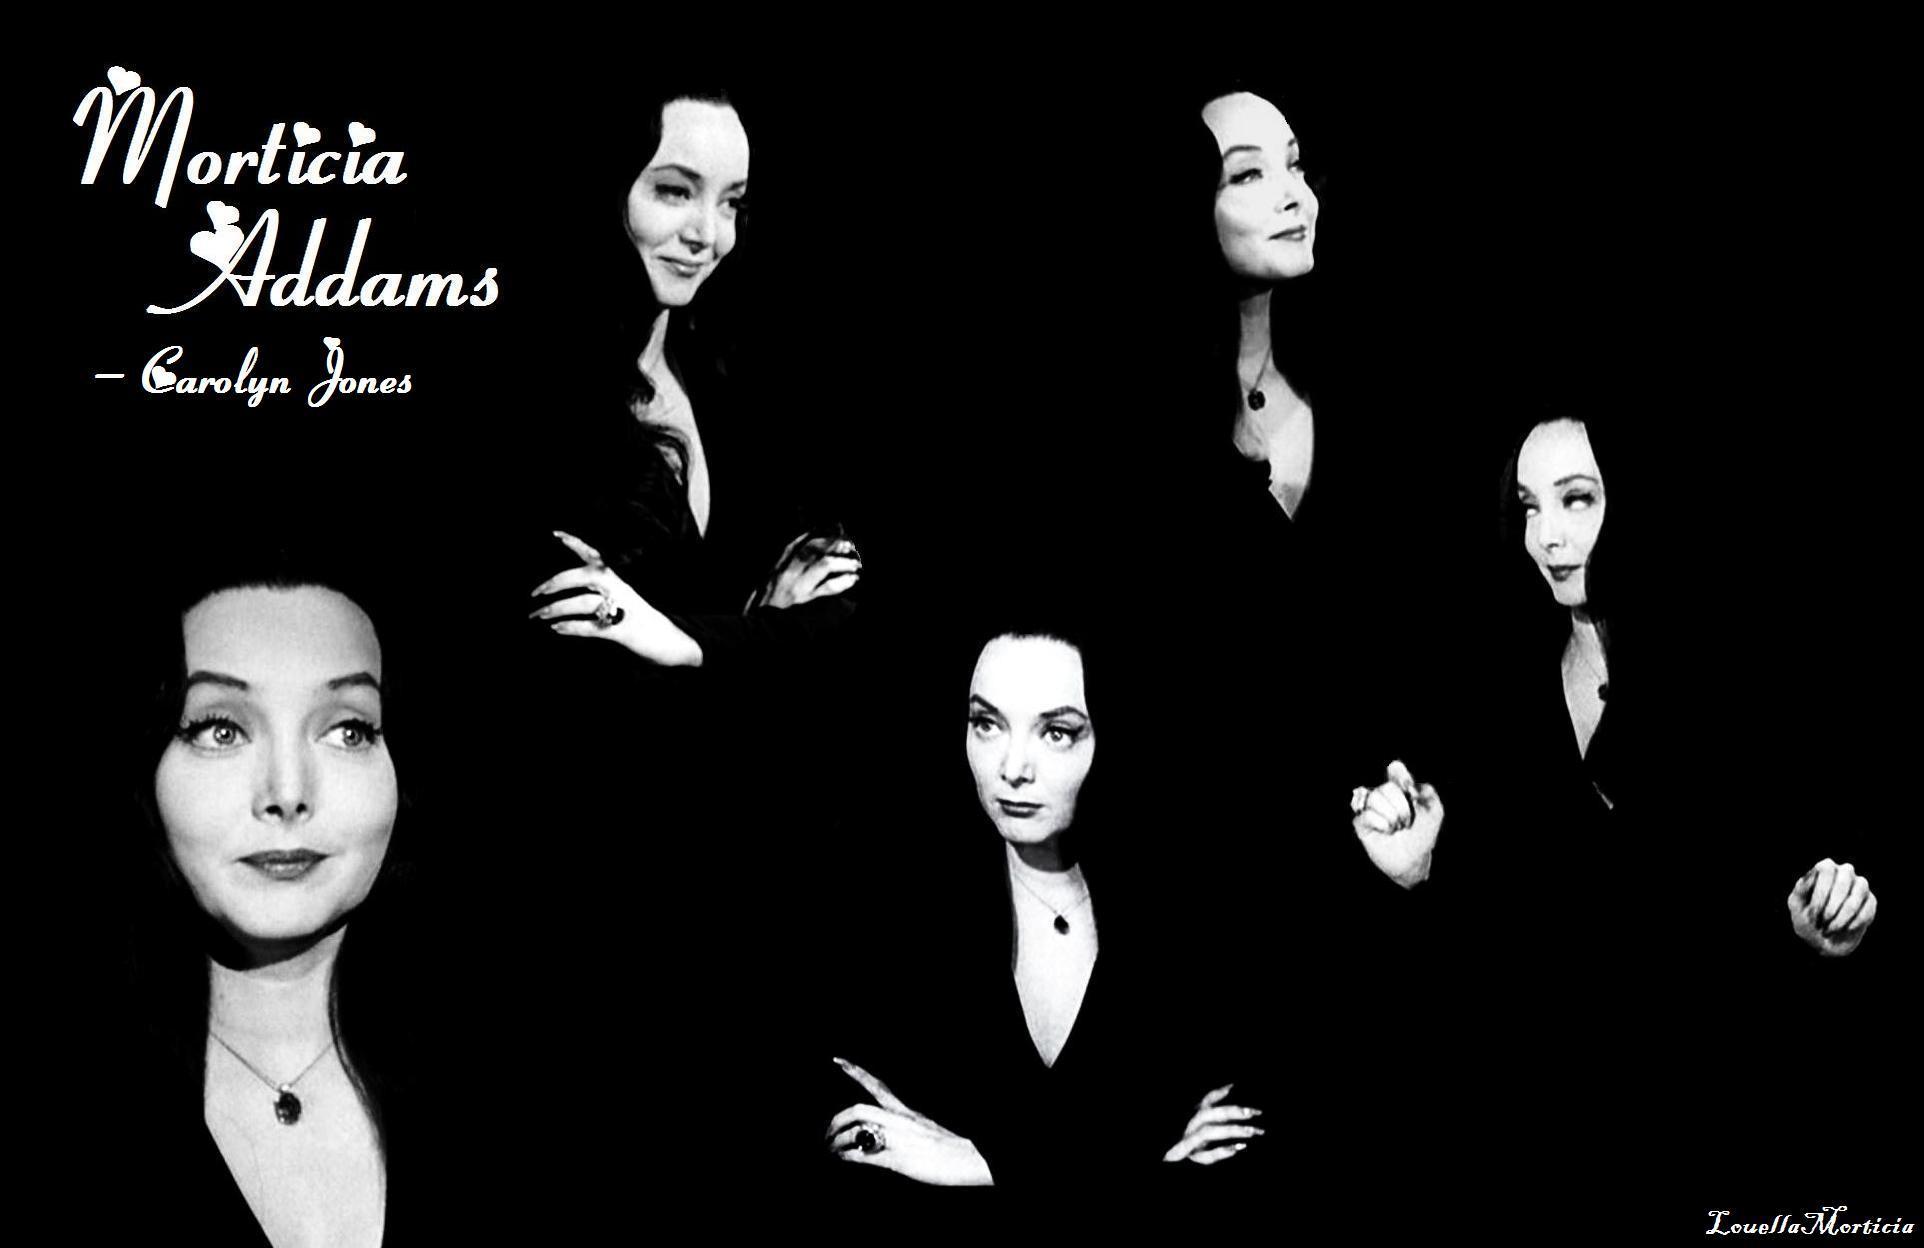  Dark Side onMorticia Addams The Addams Family and Gothic